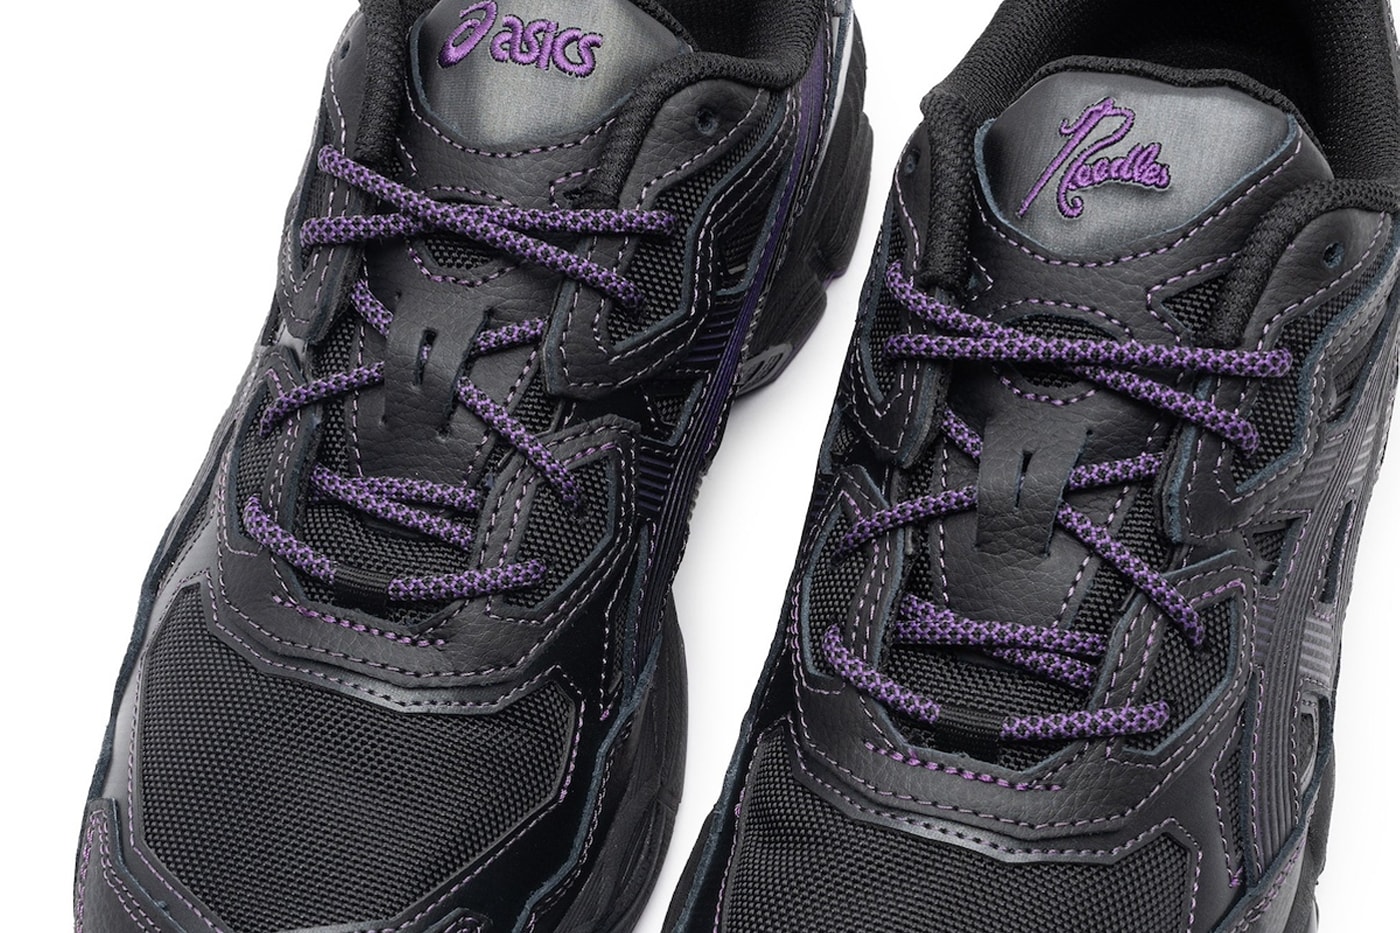 Official Look at the NEEDLES x ASICS GEL-NYC Collaboration 1201B008-001 release info black purple running shoe footwear